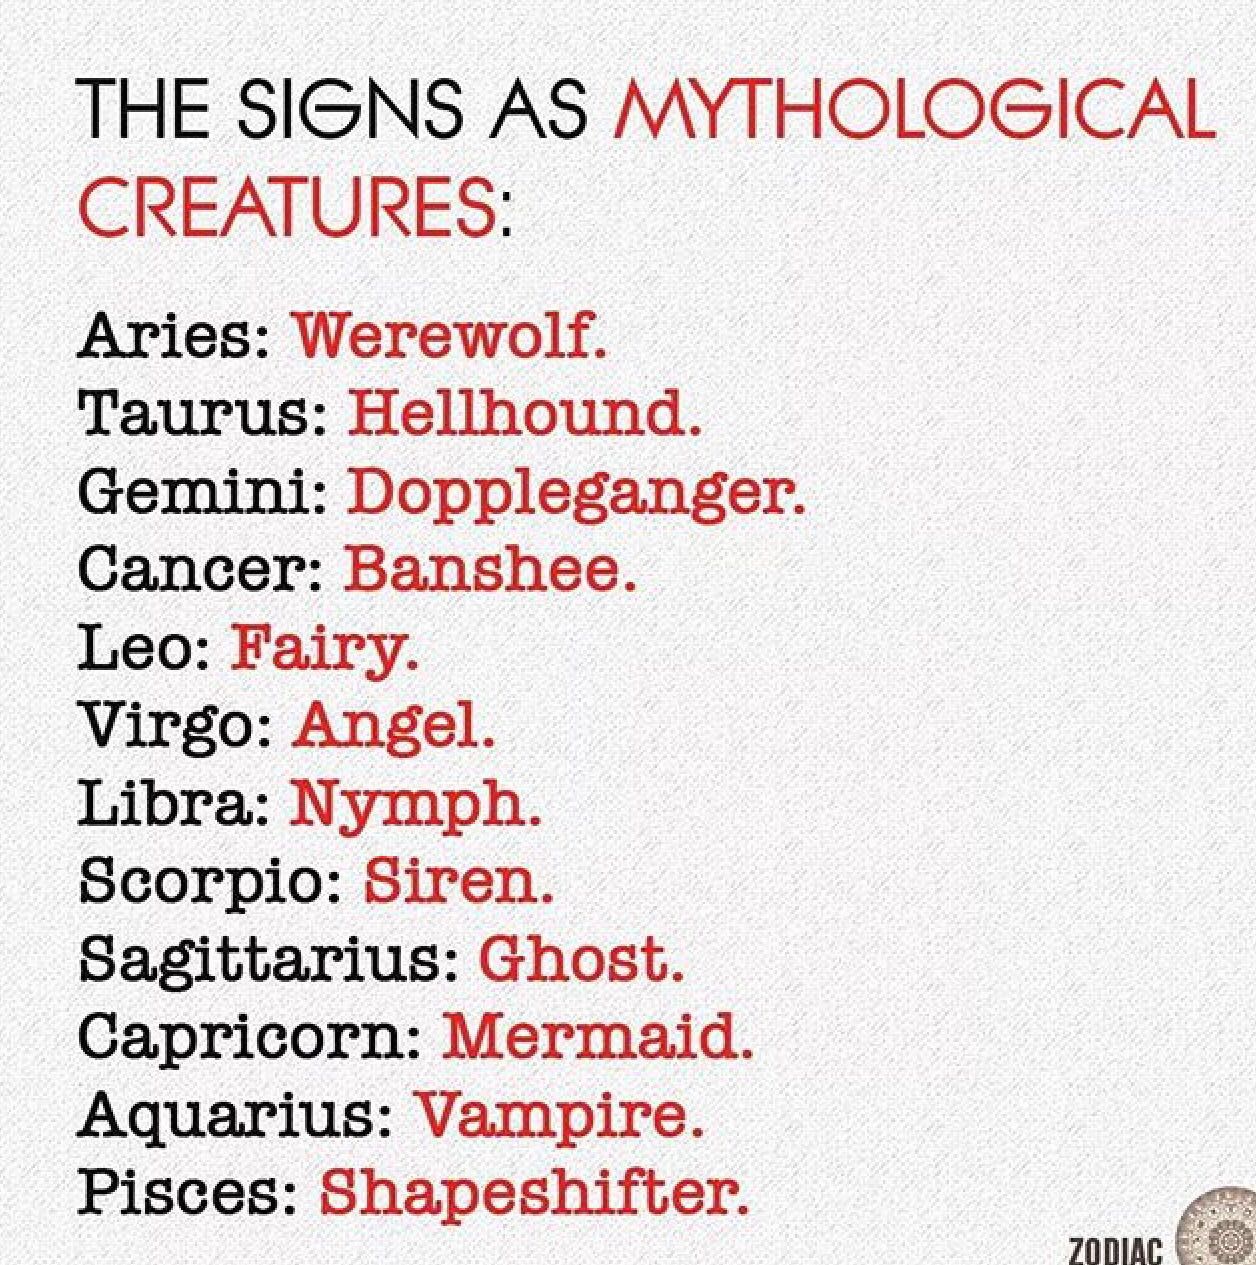 The Book of Zodiac Signs Signs as Mythological Creatures